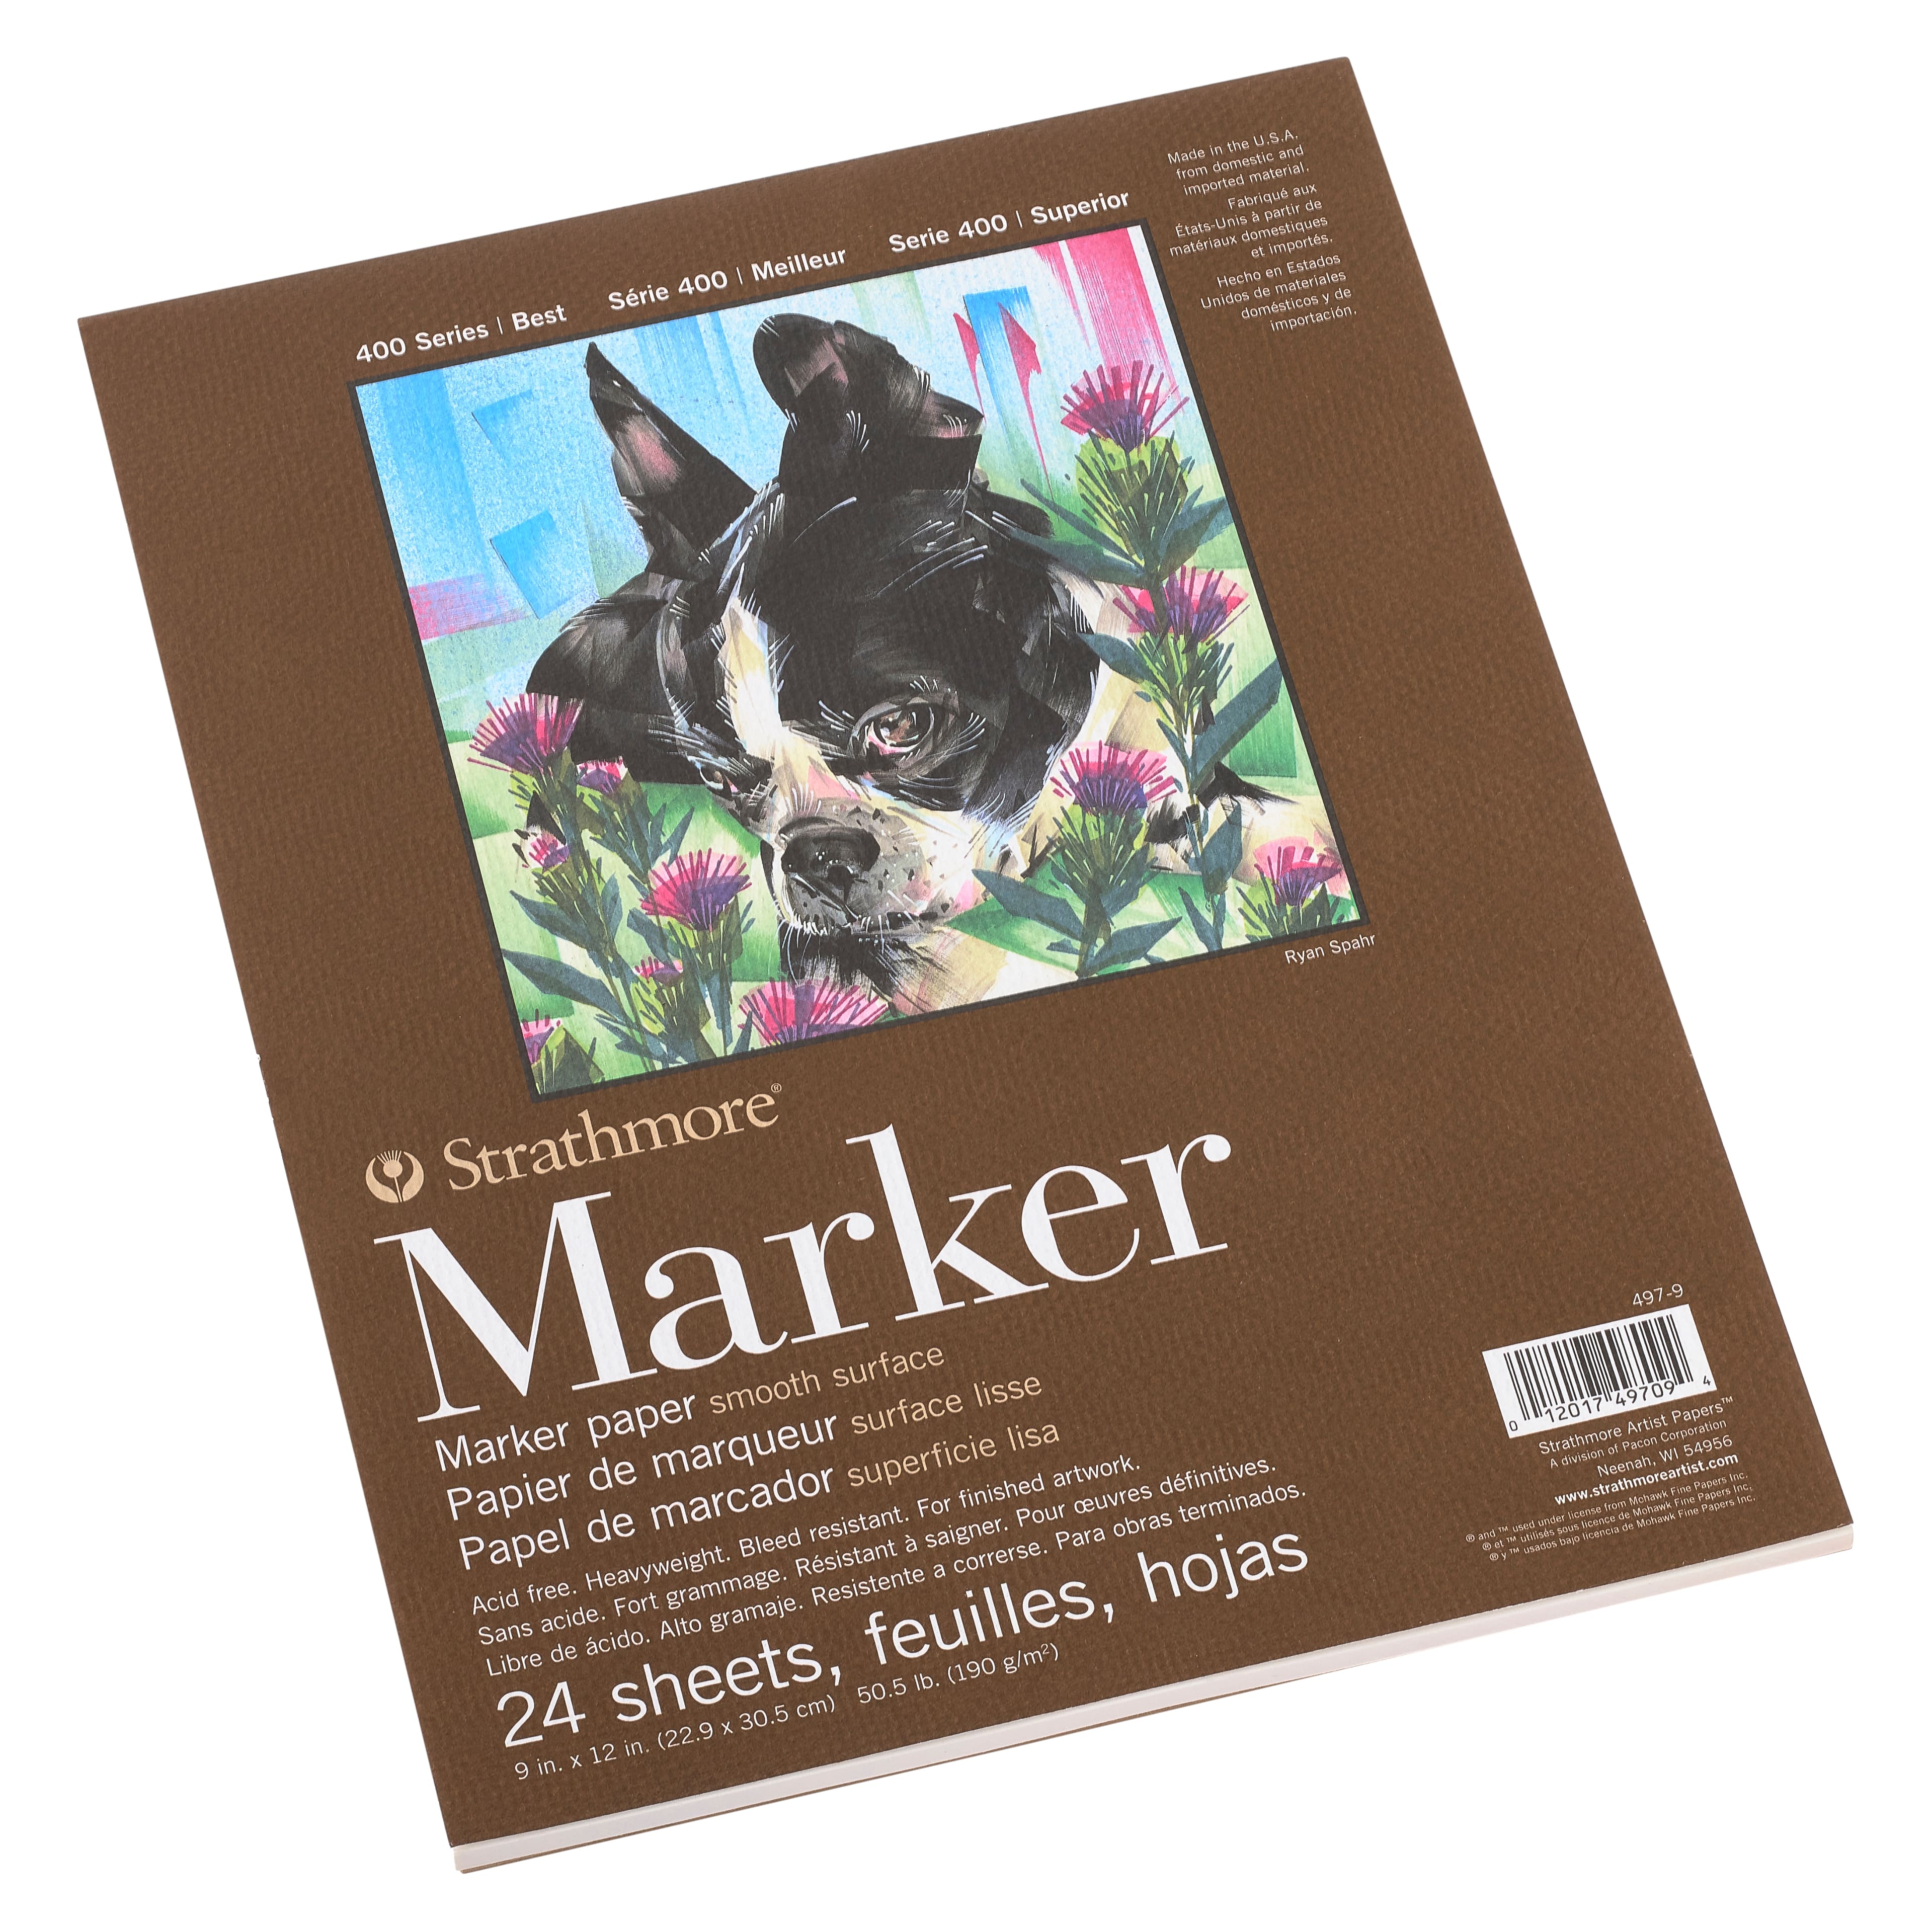  Strathmore Marker Paper Pad 6X8-50lb Smooth 24 Sheets  -62497600